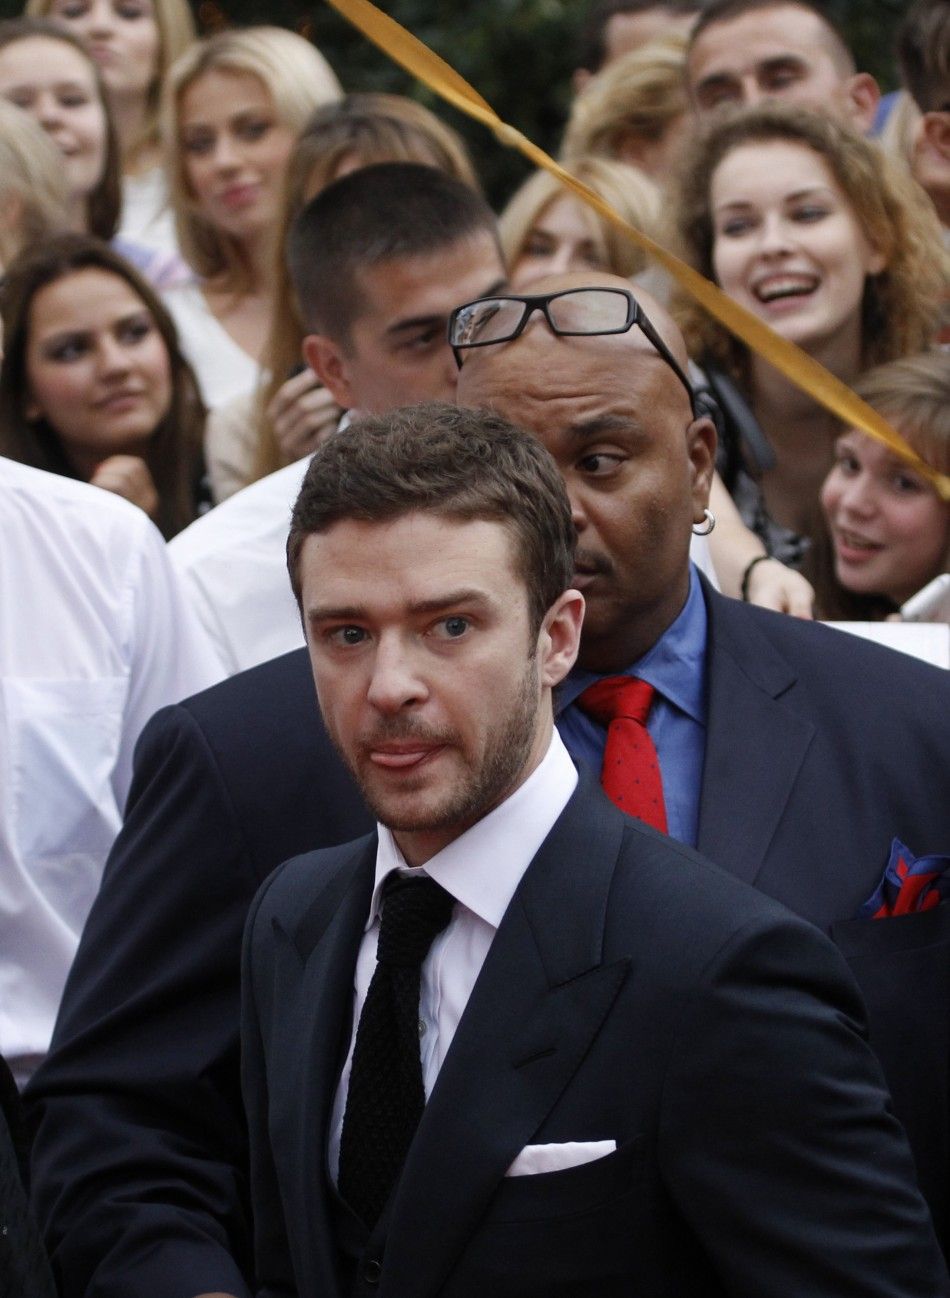 Friends with Benefits Moscow Premiere